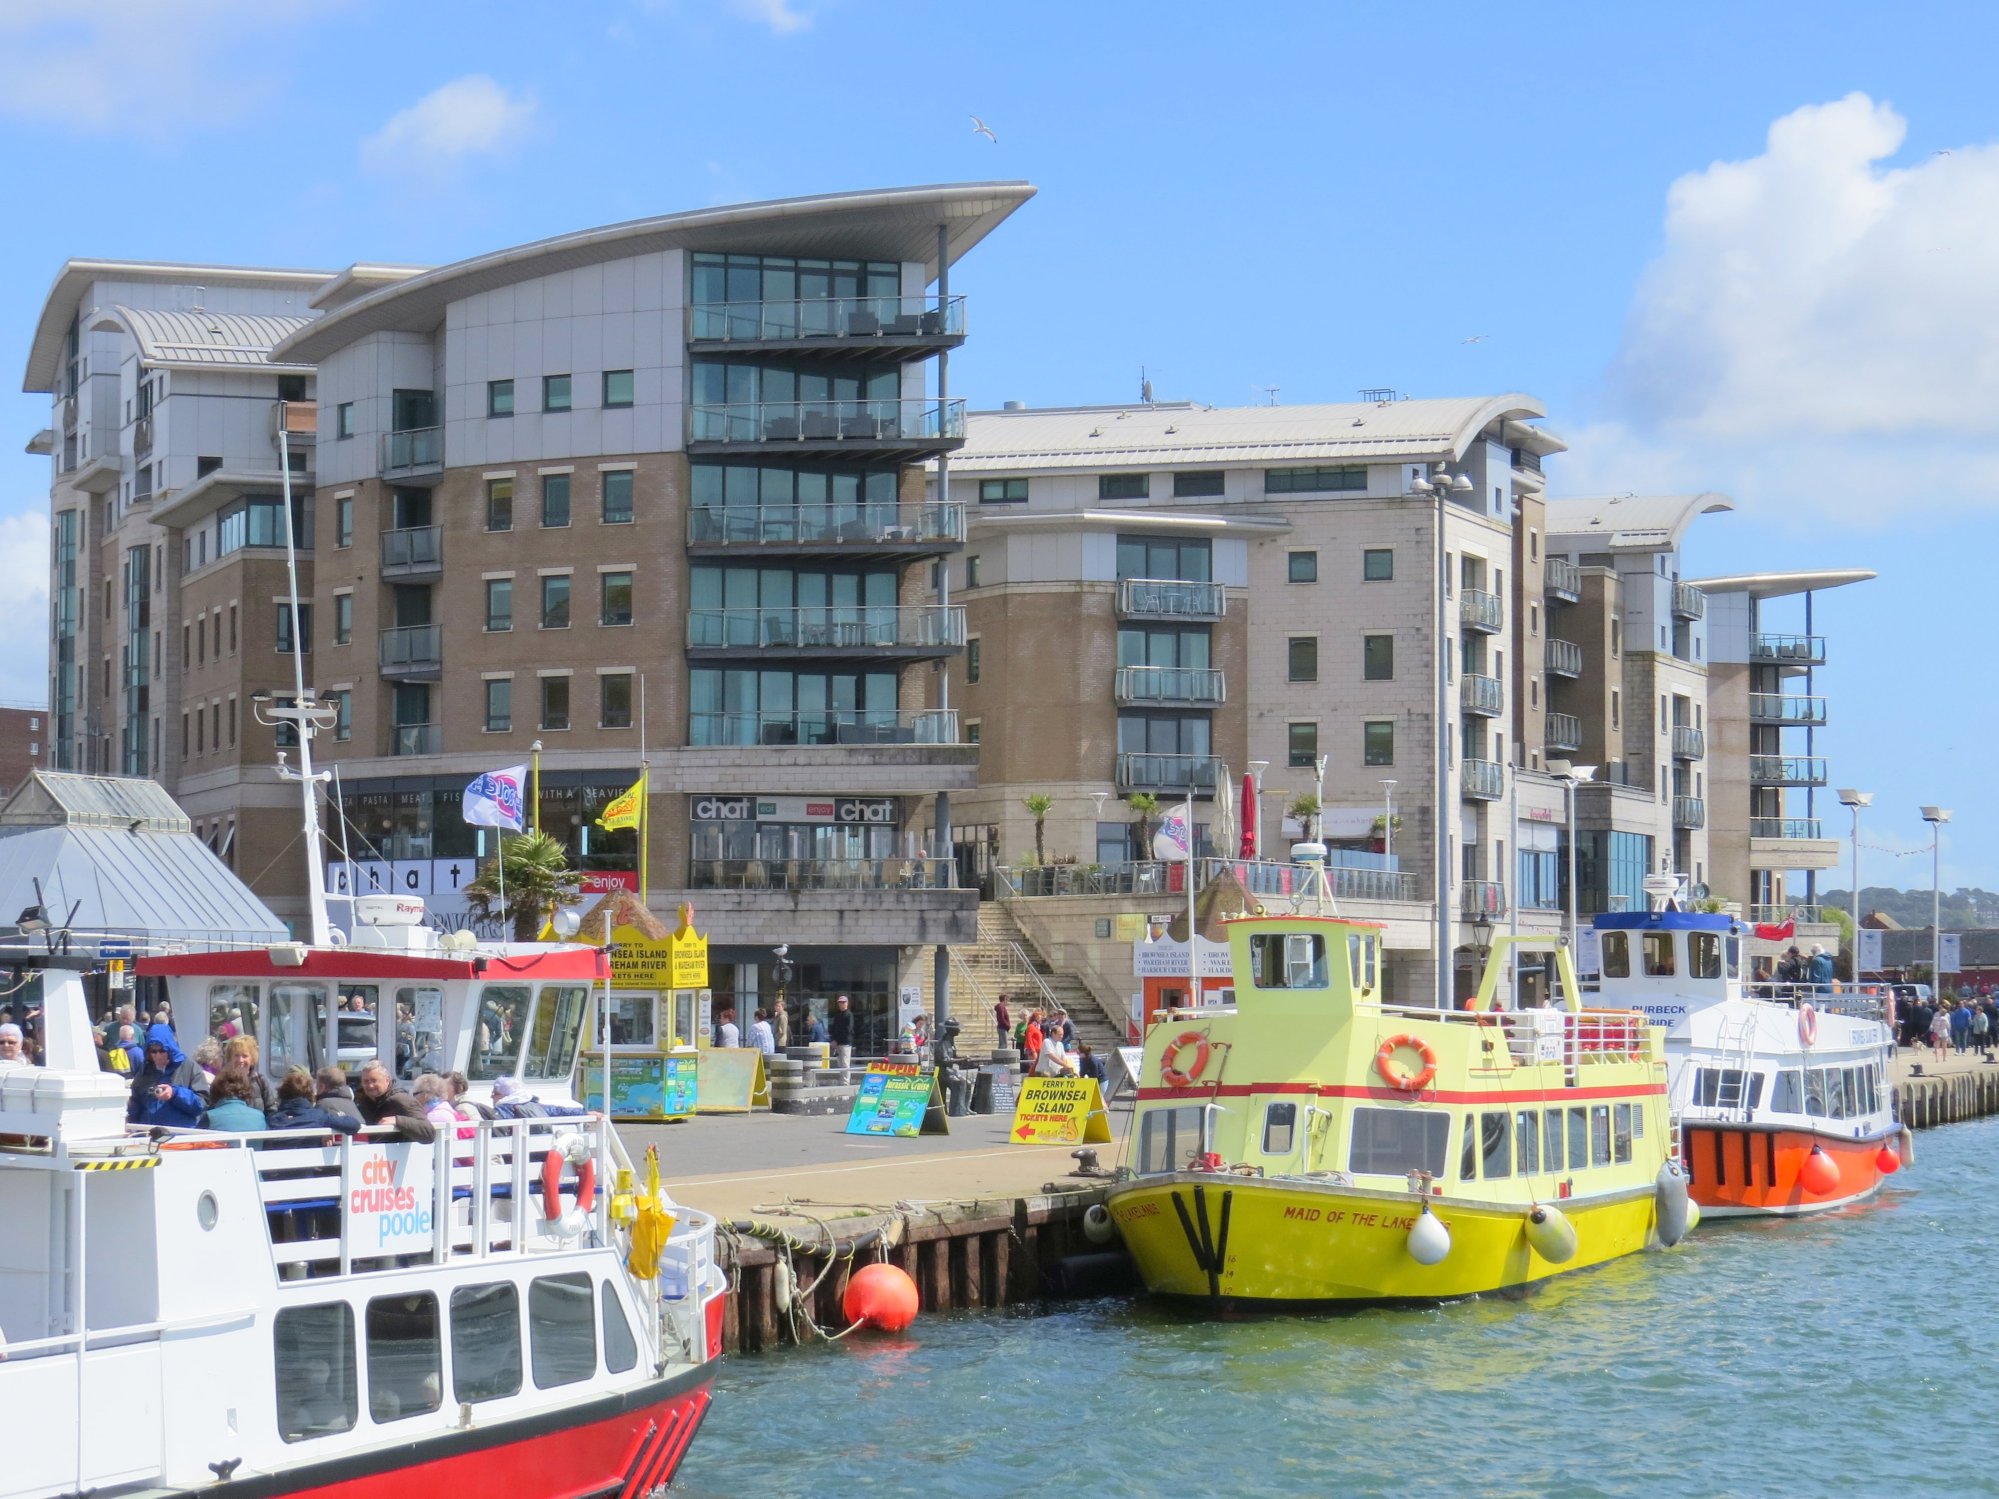 Dolphin Quays, The Quay, Poole